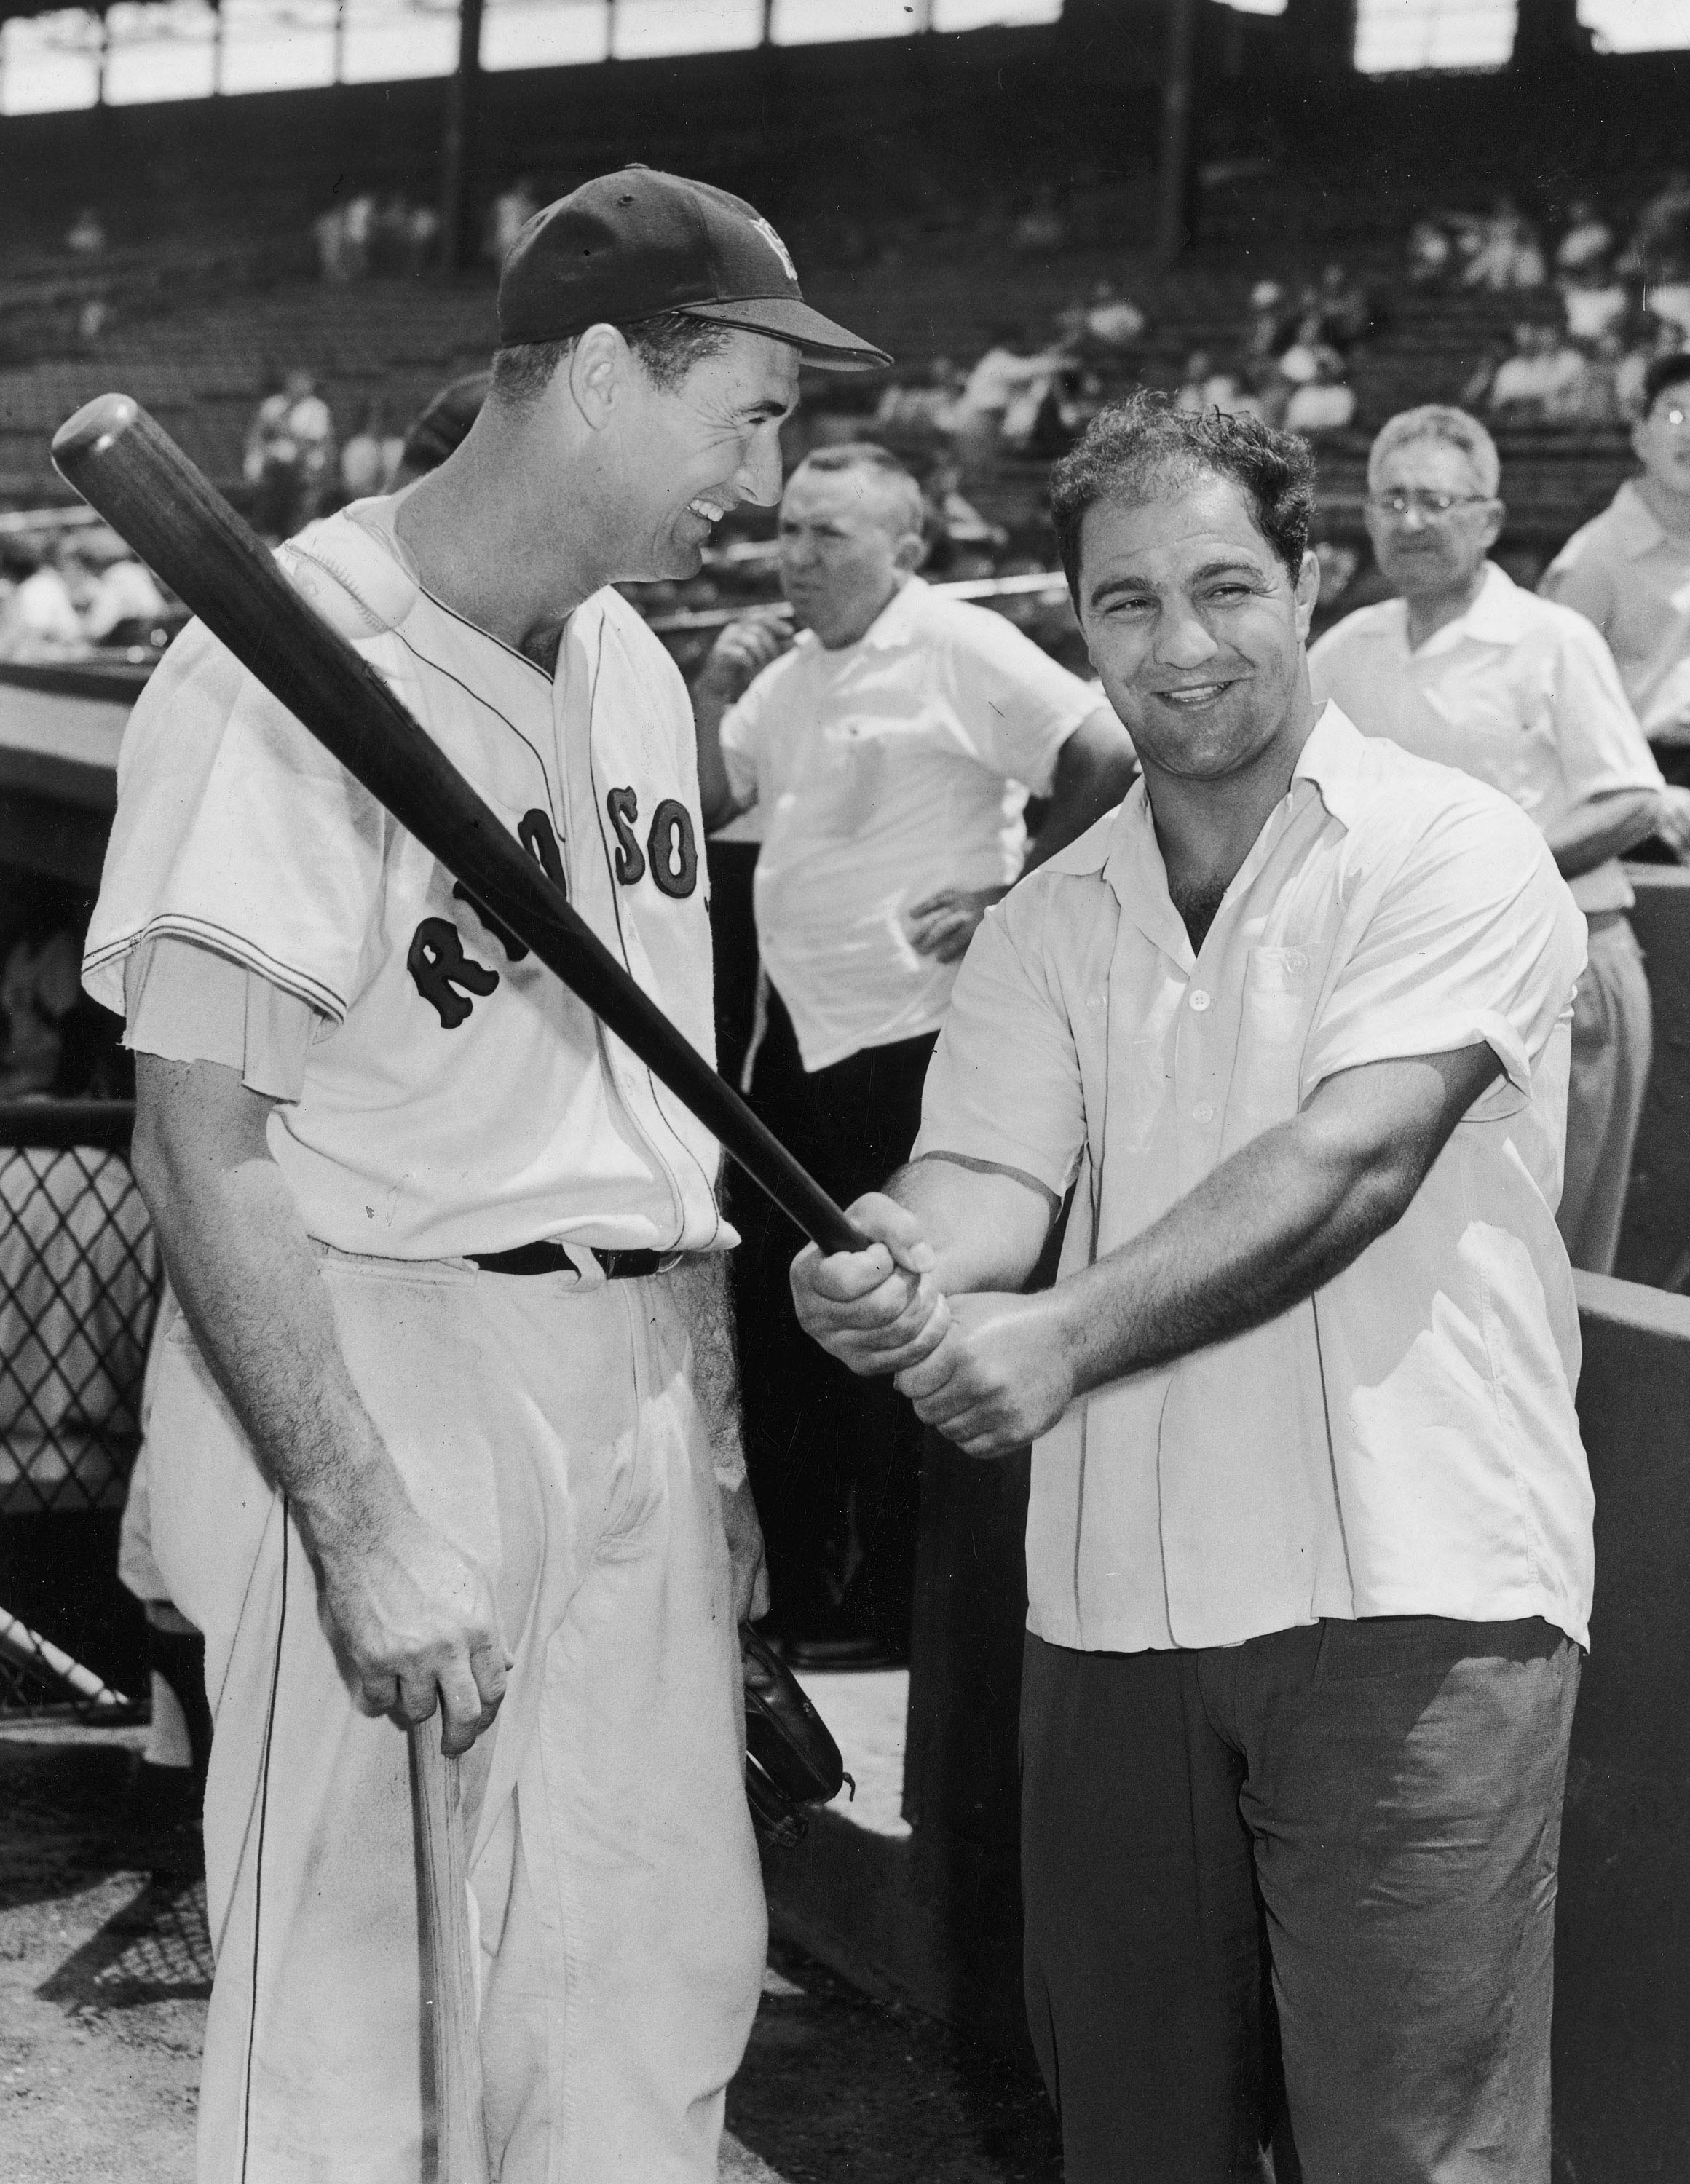 BOSTON - CIRCA 1955:  (UNDATED FILE PHOTO) Baseball legend Ted Williams (1918 - 2002) of the Boston Red Sox (L) laughs as American boxing great Rocky Marciano (1923 - 1969) swings a bat circa 1955. The 83-year-old Williams, who was the last major league p